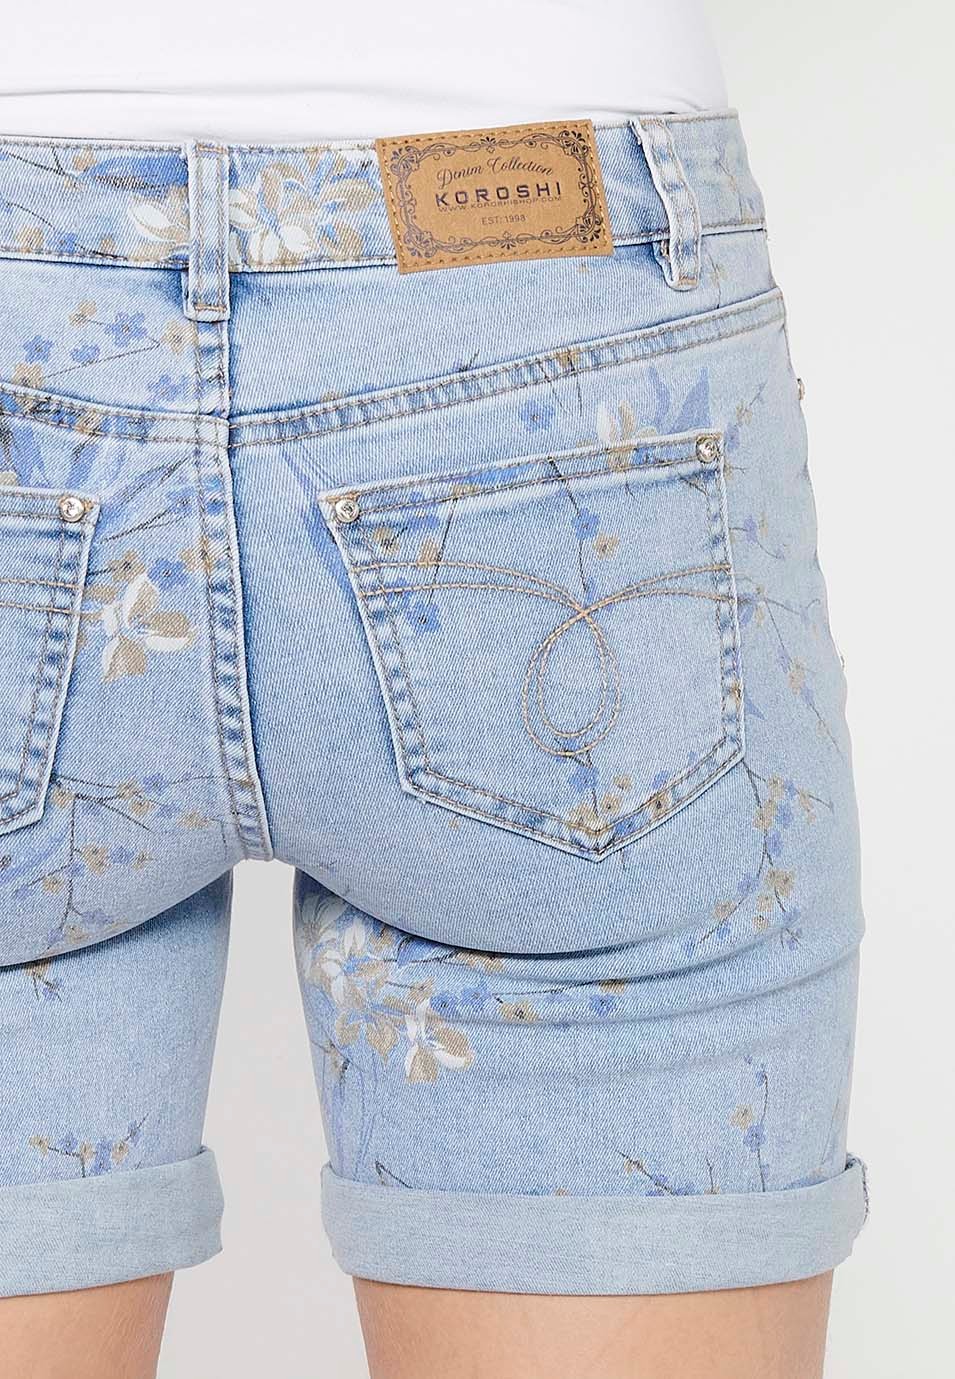 Shorts with a turn-up finish with zipper and button closure with a Blue floral print for Women 9